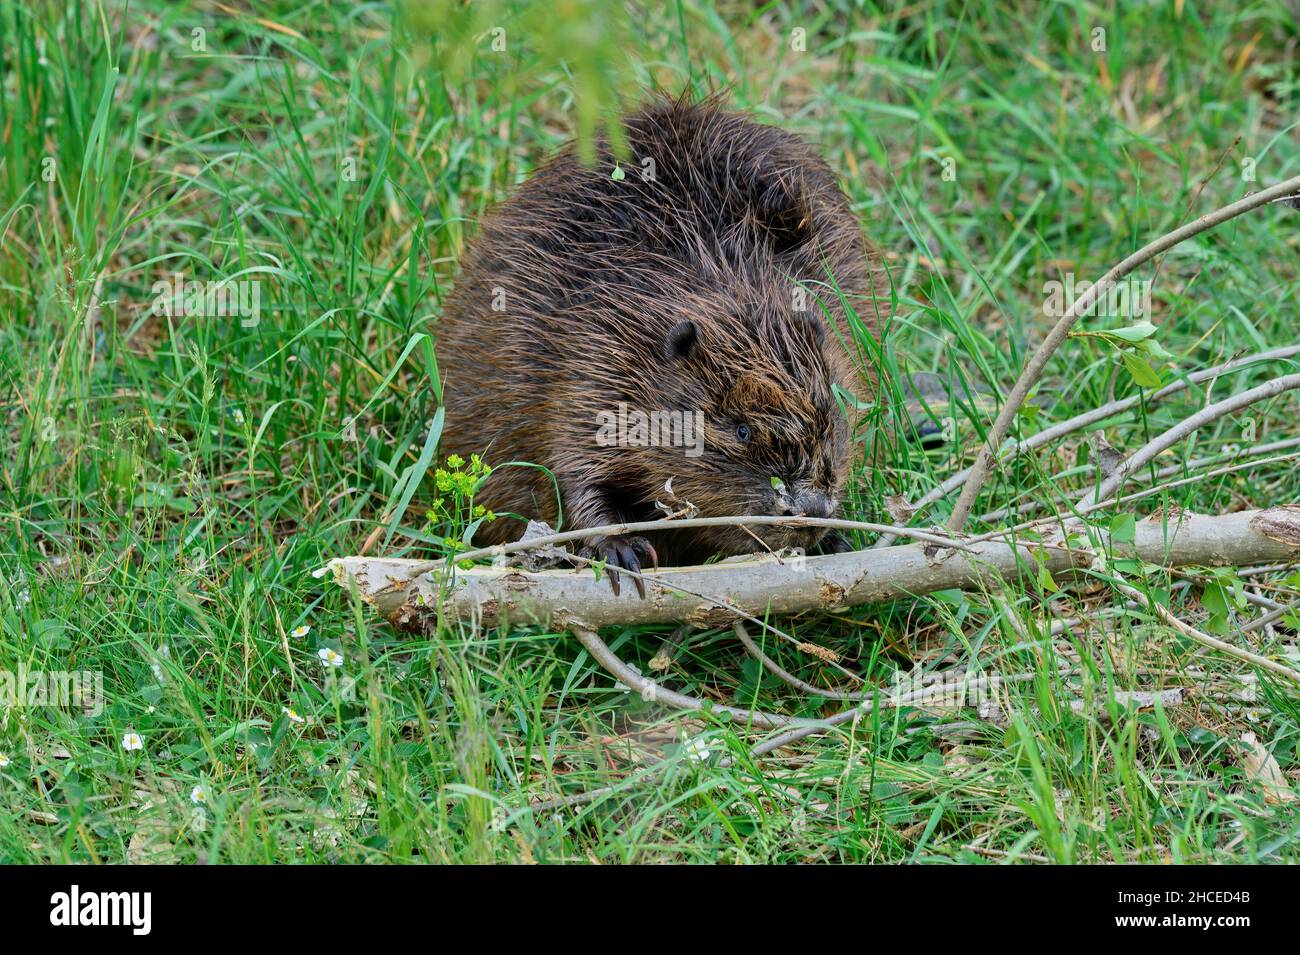 Eurasian beaver with a tree branch in the grass. Eating bark. Front view, closeup. Genus species Castor fiber. Stock Photo